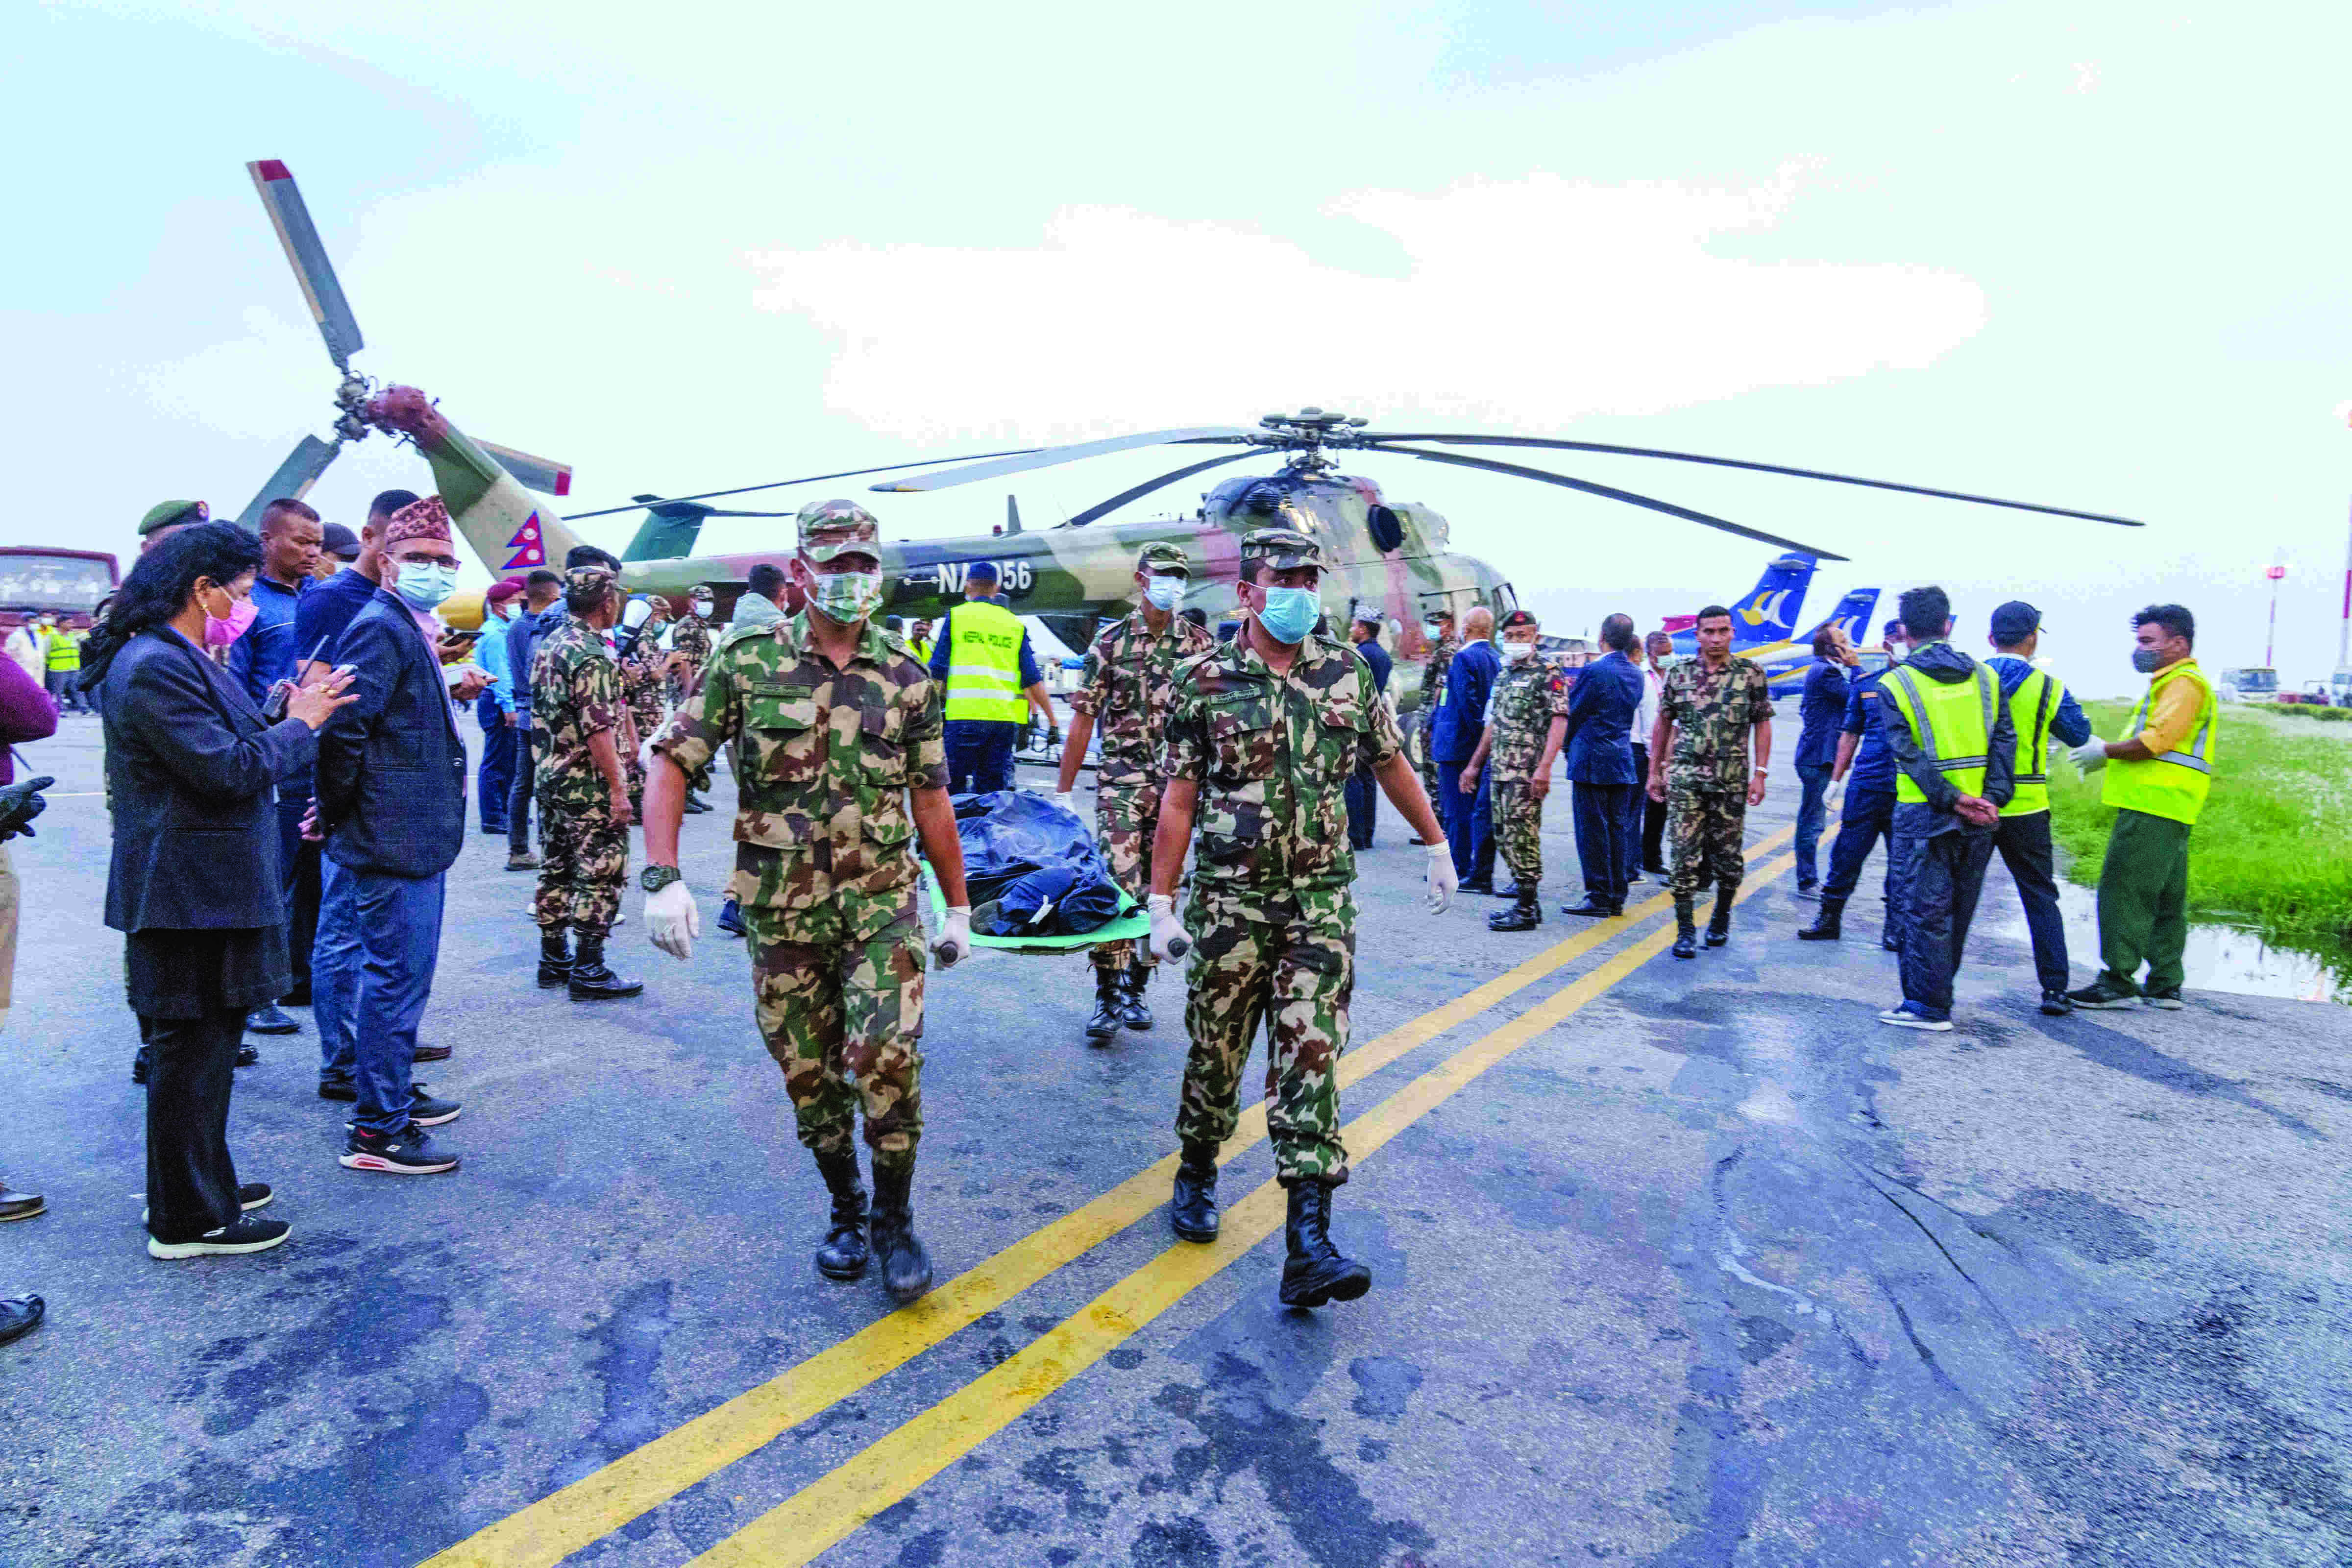 21 bodies recovered from Tara Air plane crash site in Nepal